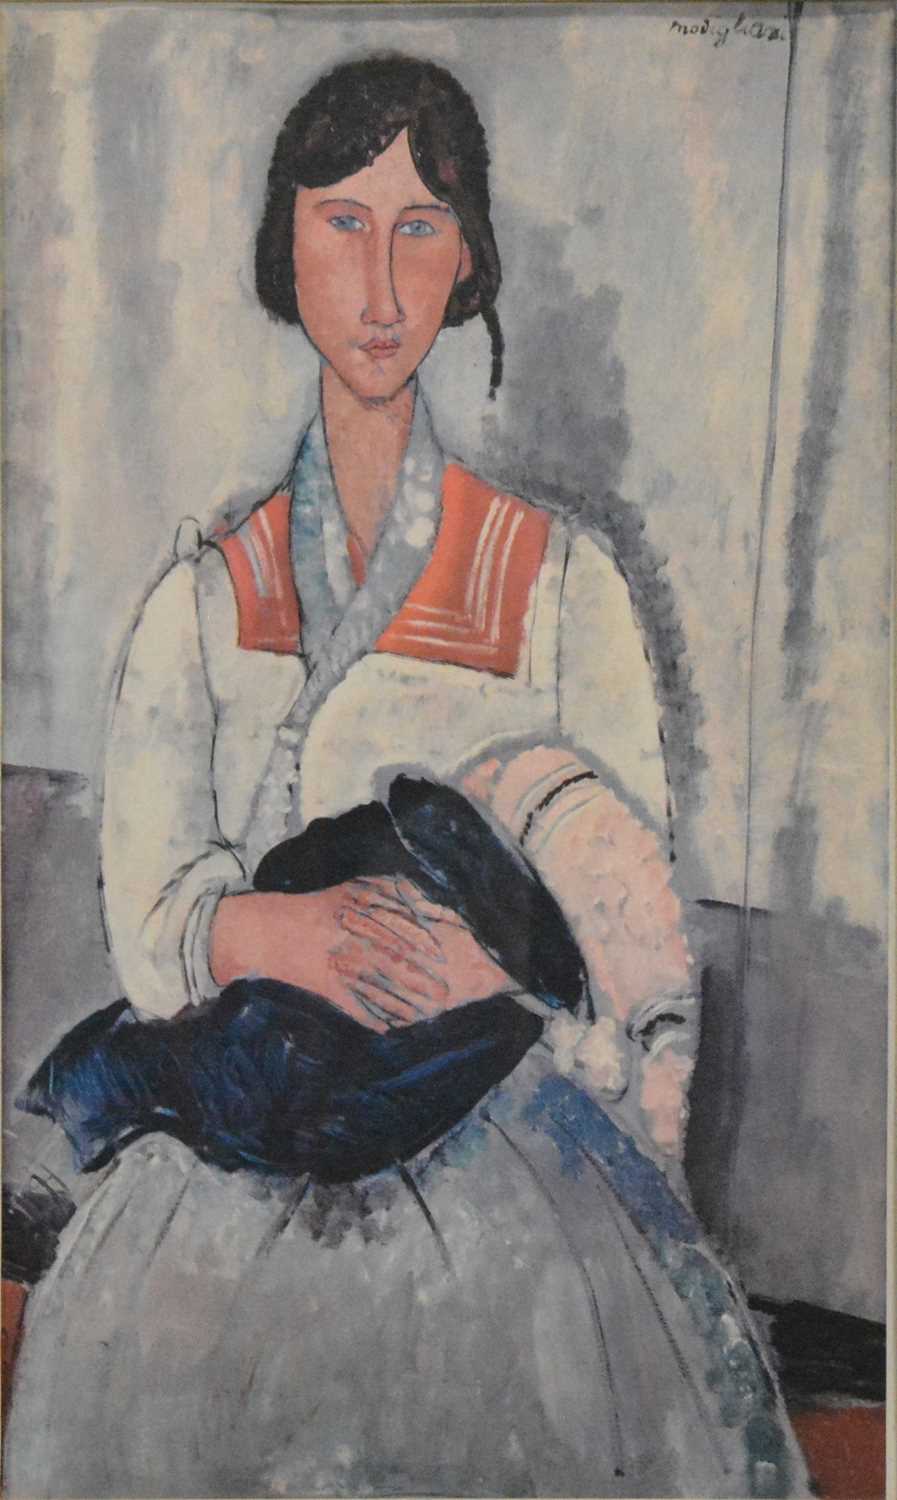 After Modigliani, Gypsy Woman with a Baby